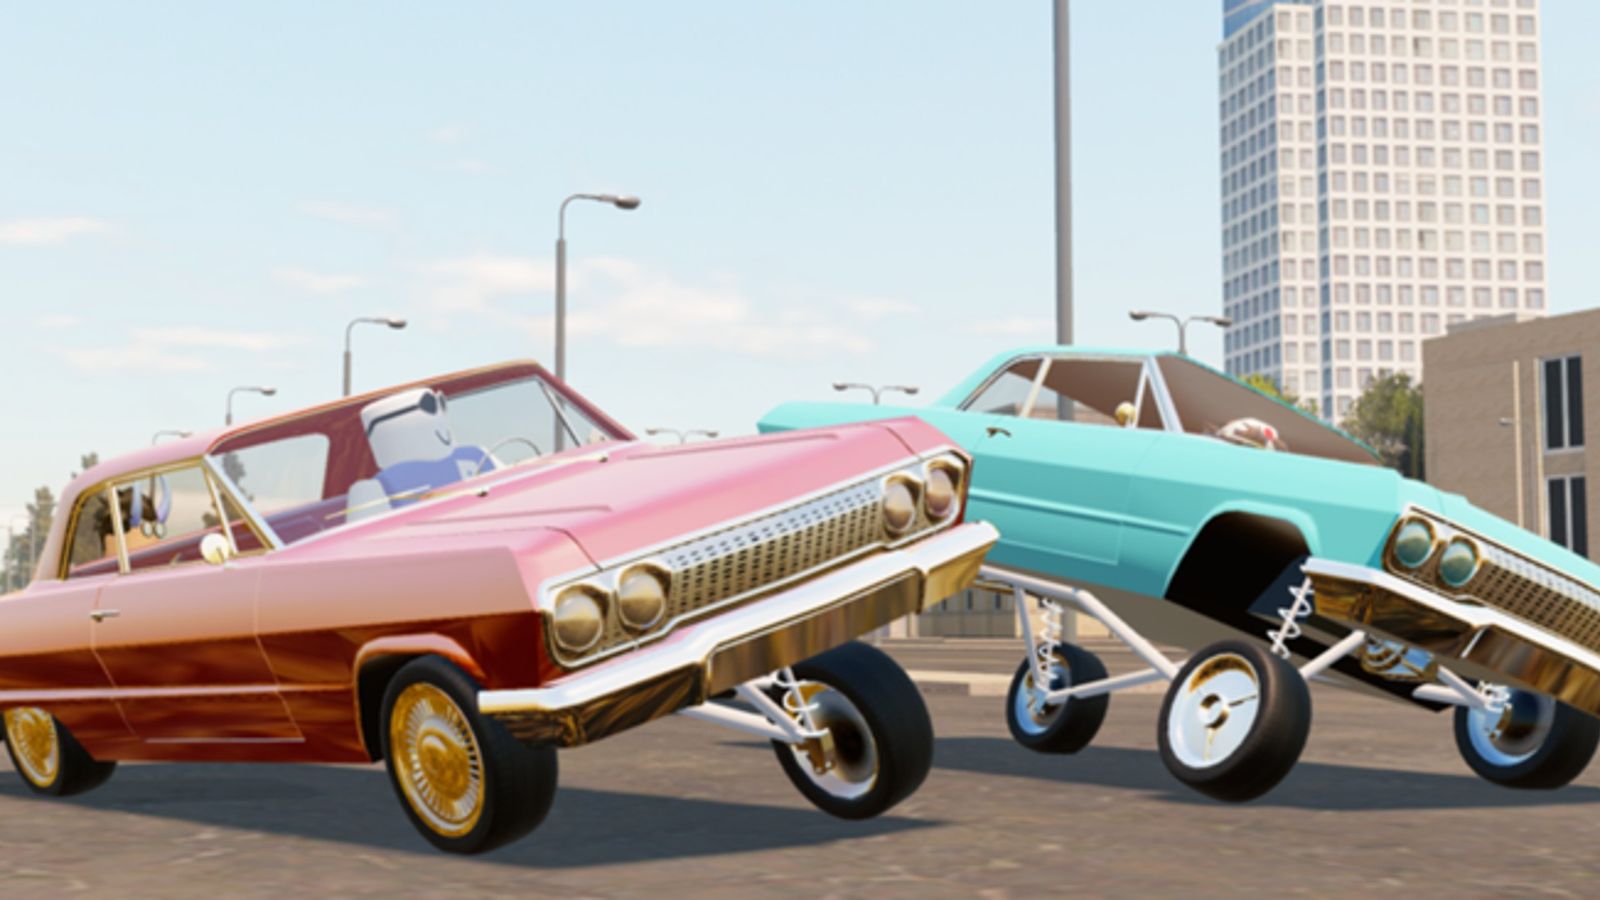 Image from Takeover Alpha, showing two Roblox cars freewheeling